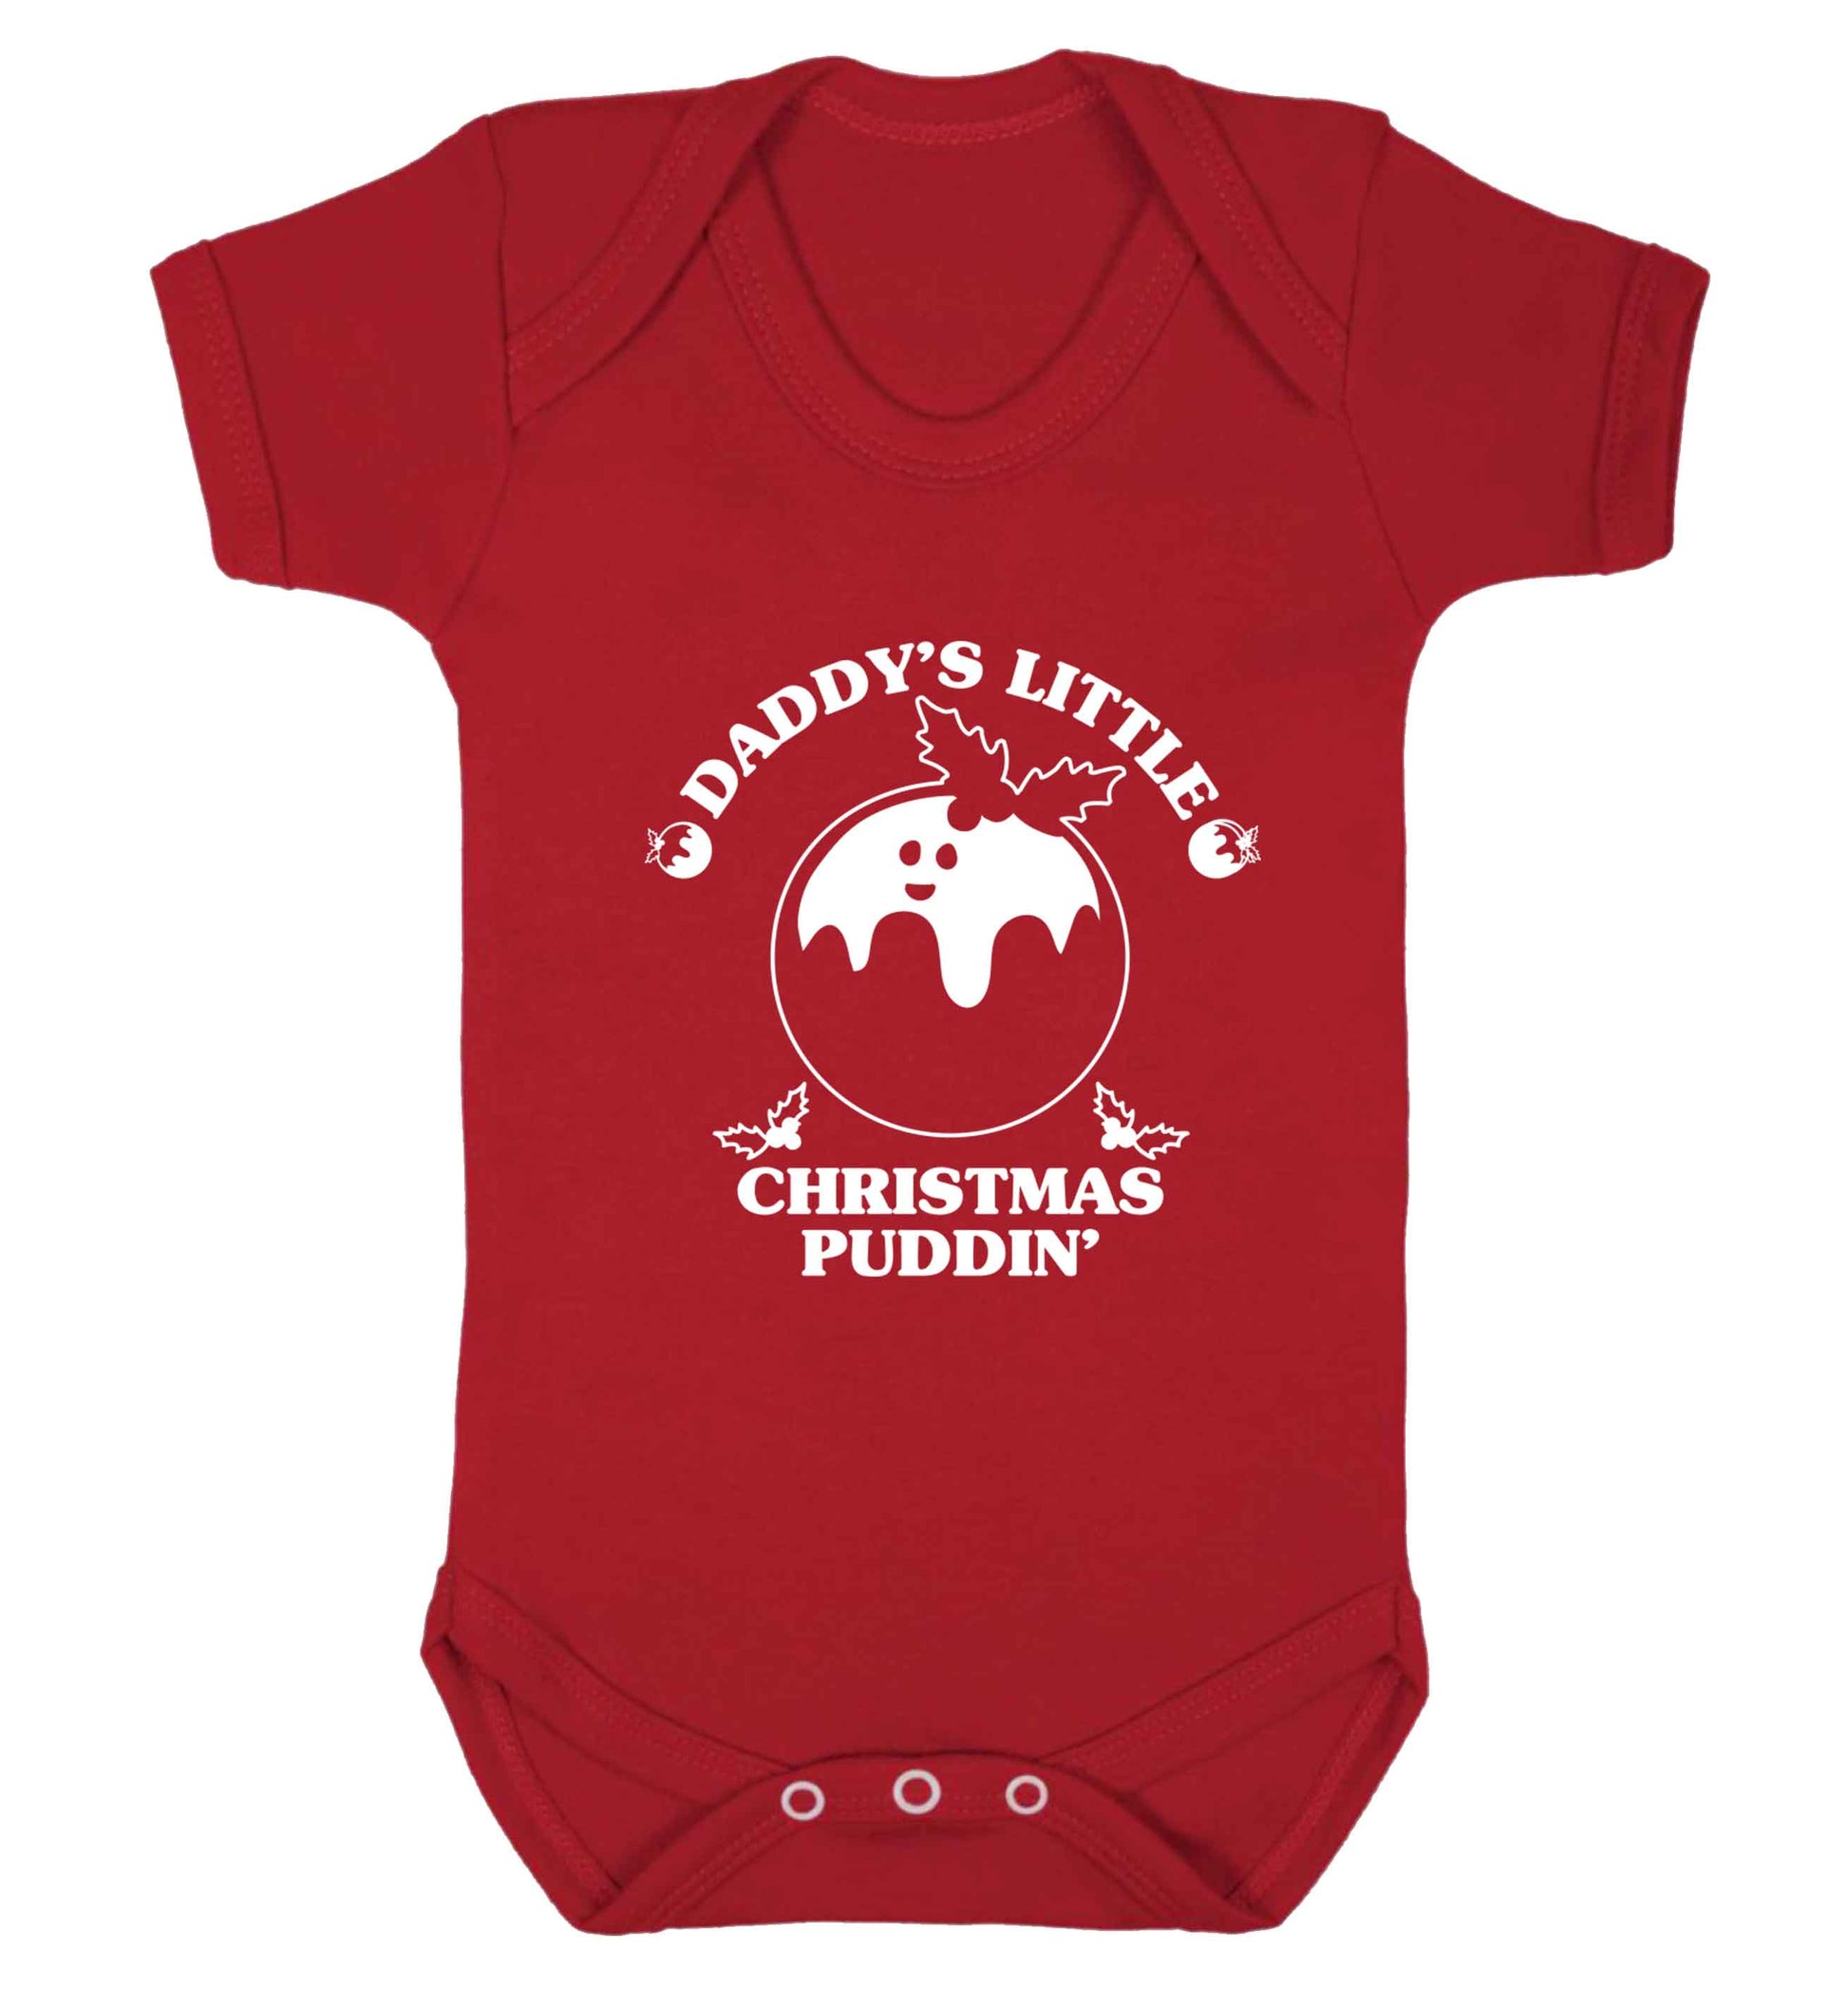 Daddy's little Christmas puddin' Baby Vest red 18-24 months